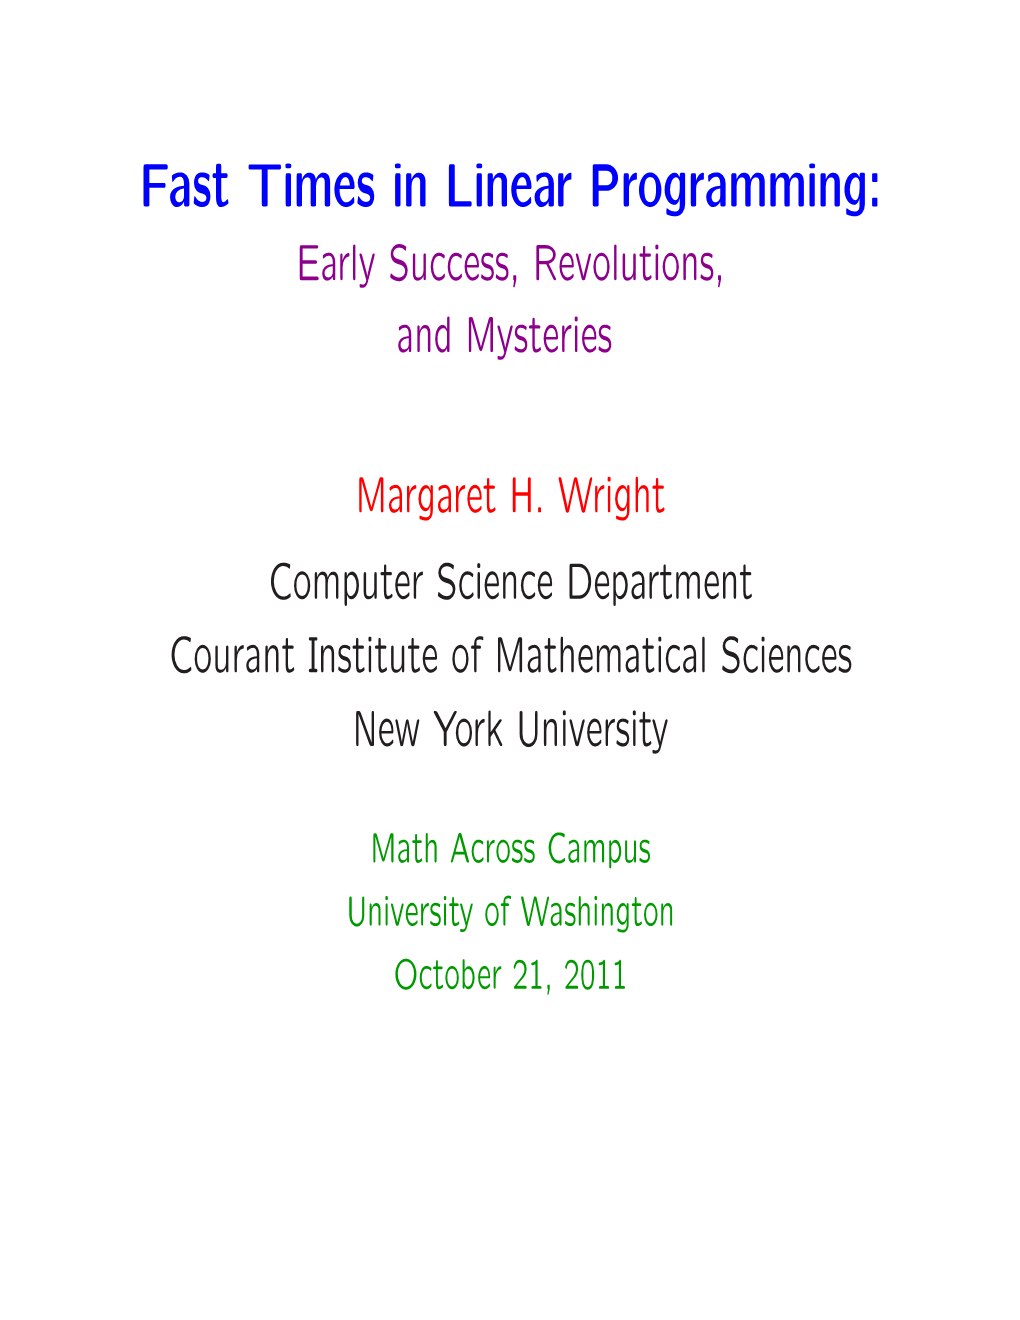 Fast Times in Linear Programming: Early Success, Revolutions, and Mysteries